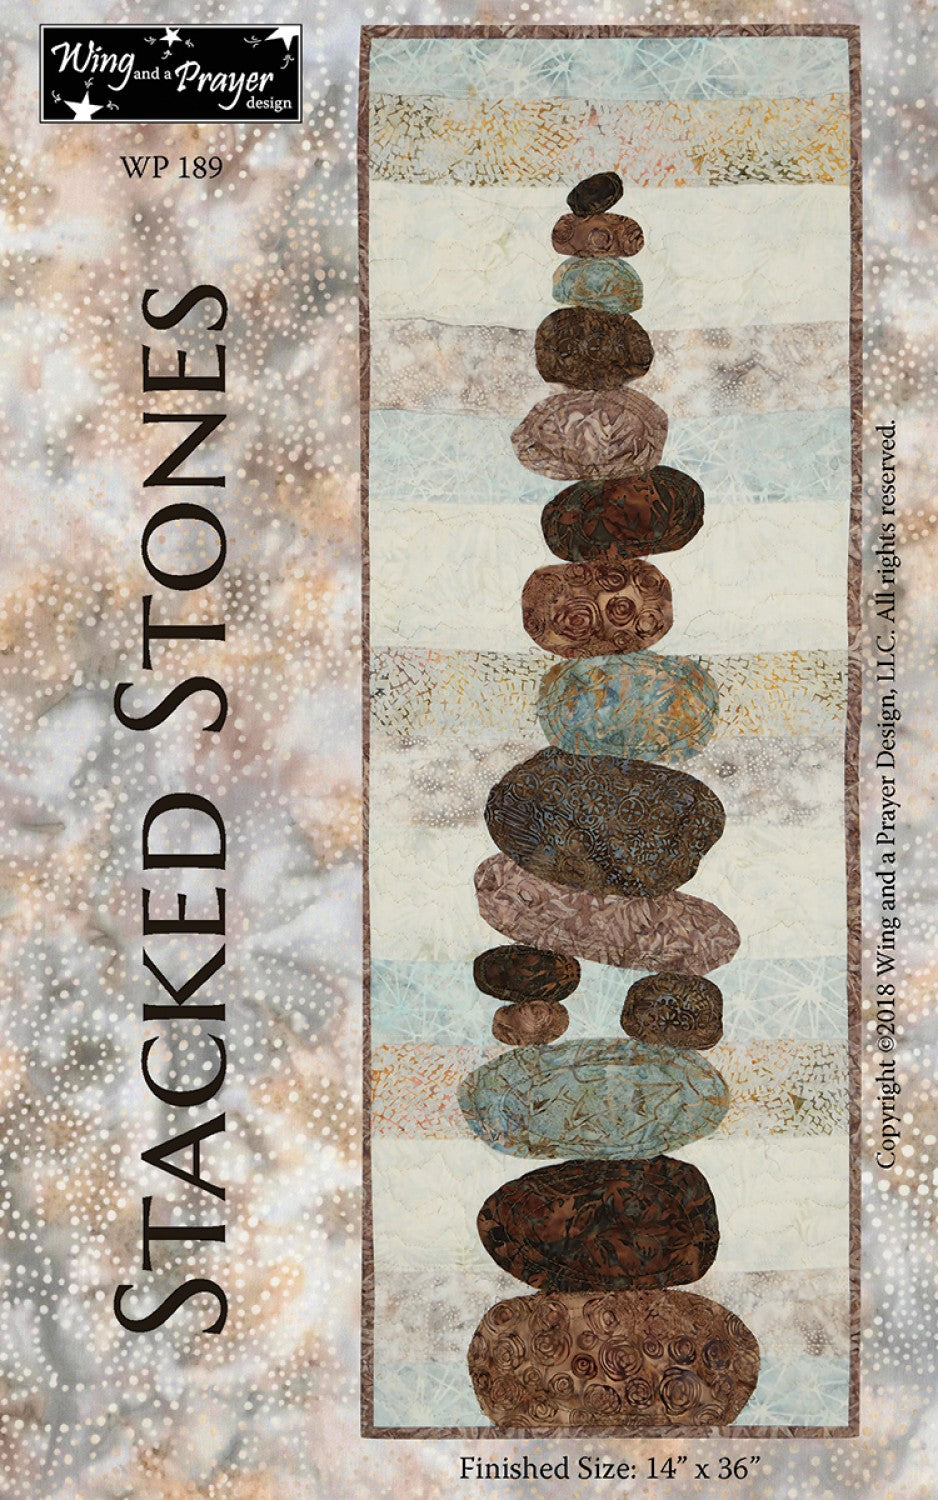 Stacked Stones, From Wing and a Prayer Design